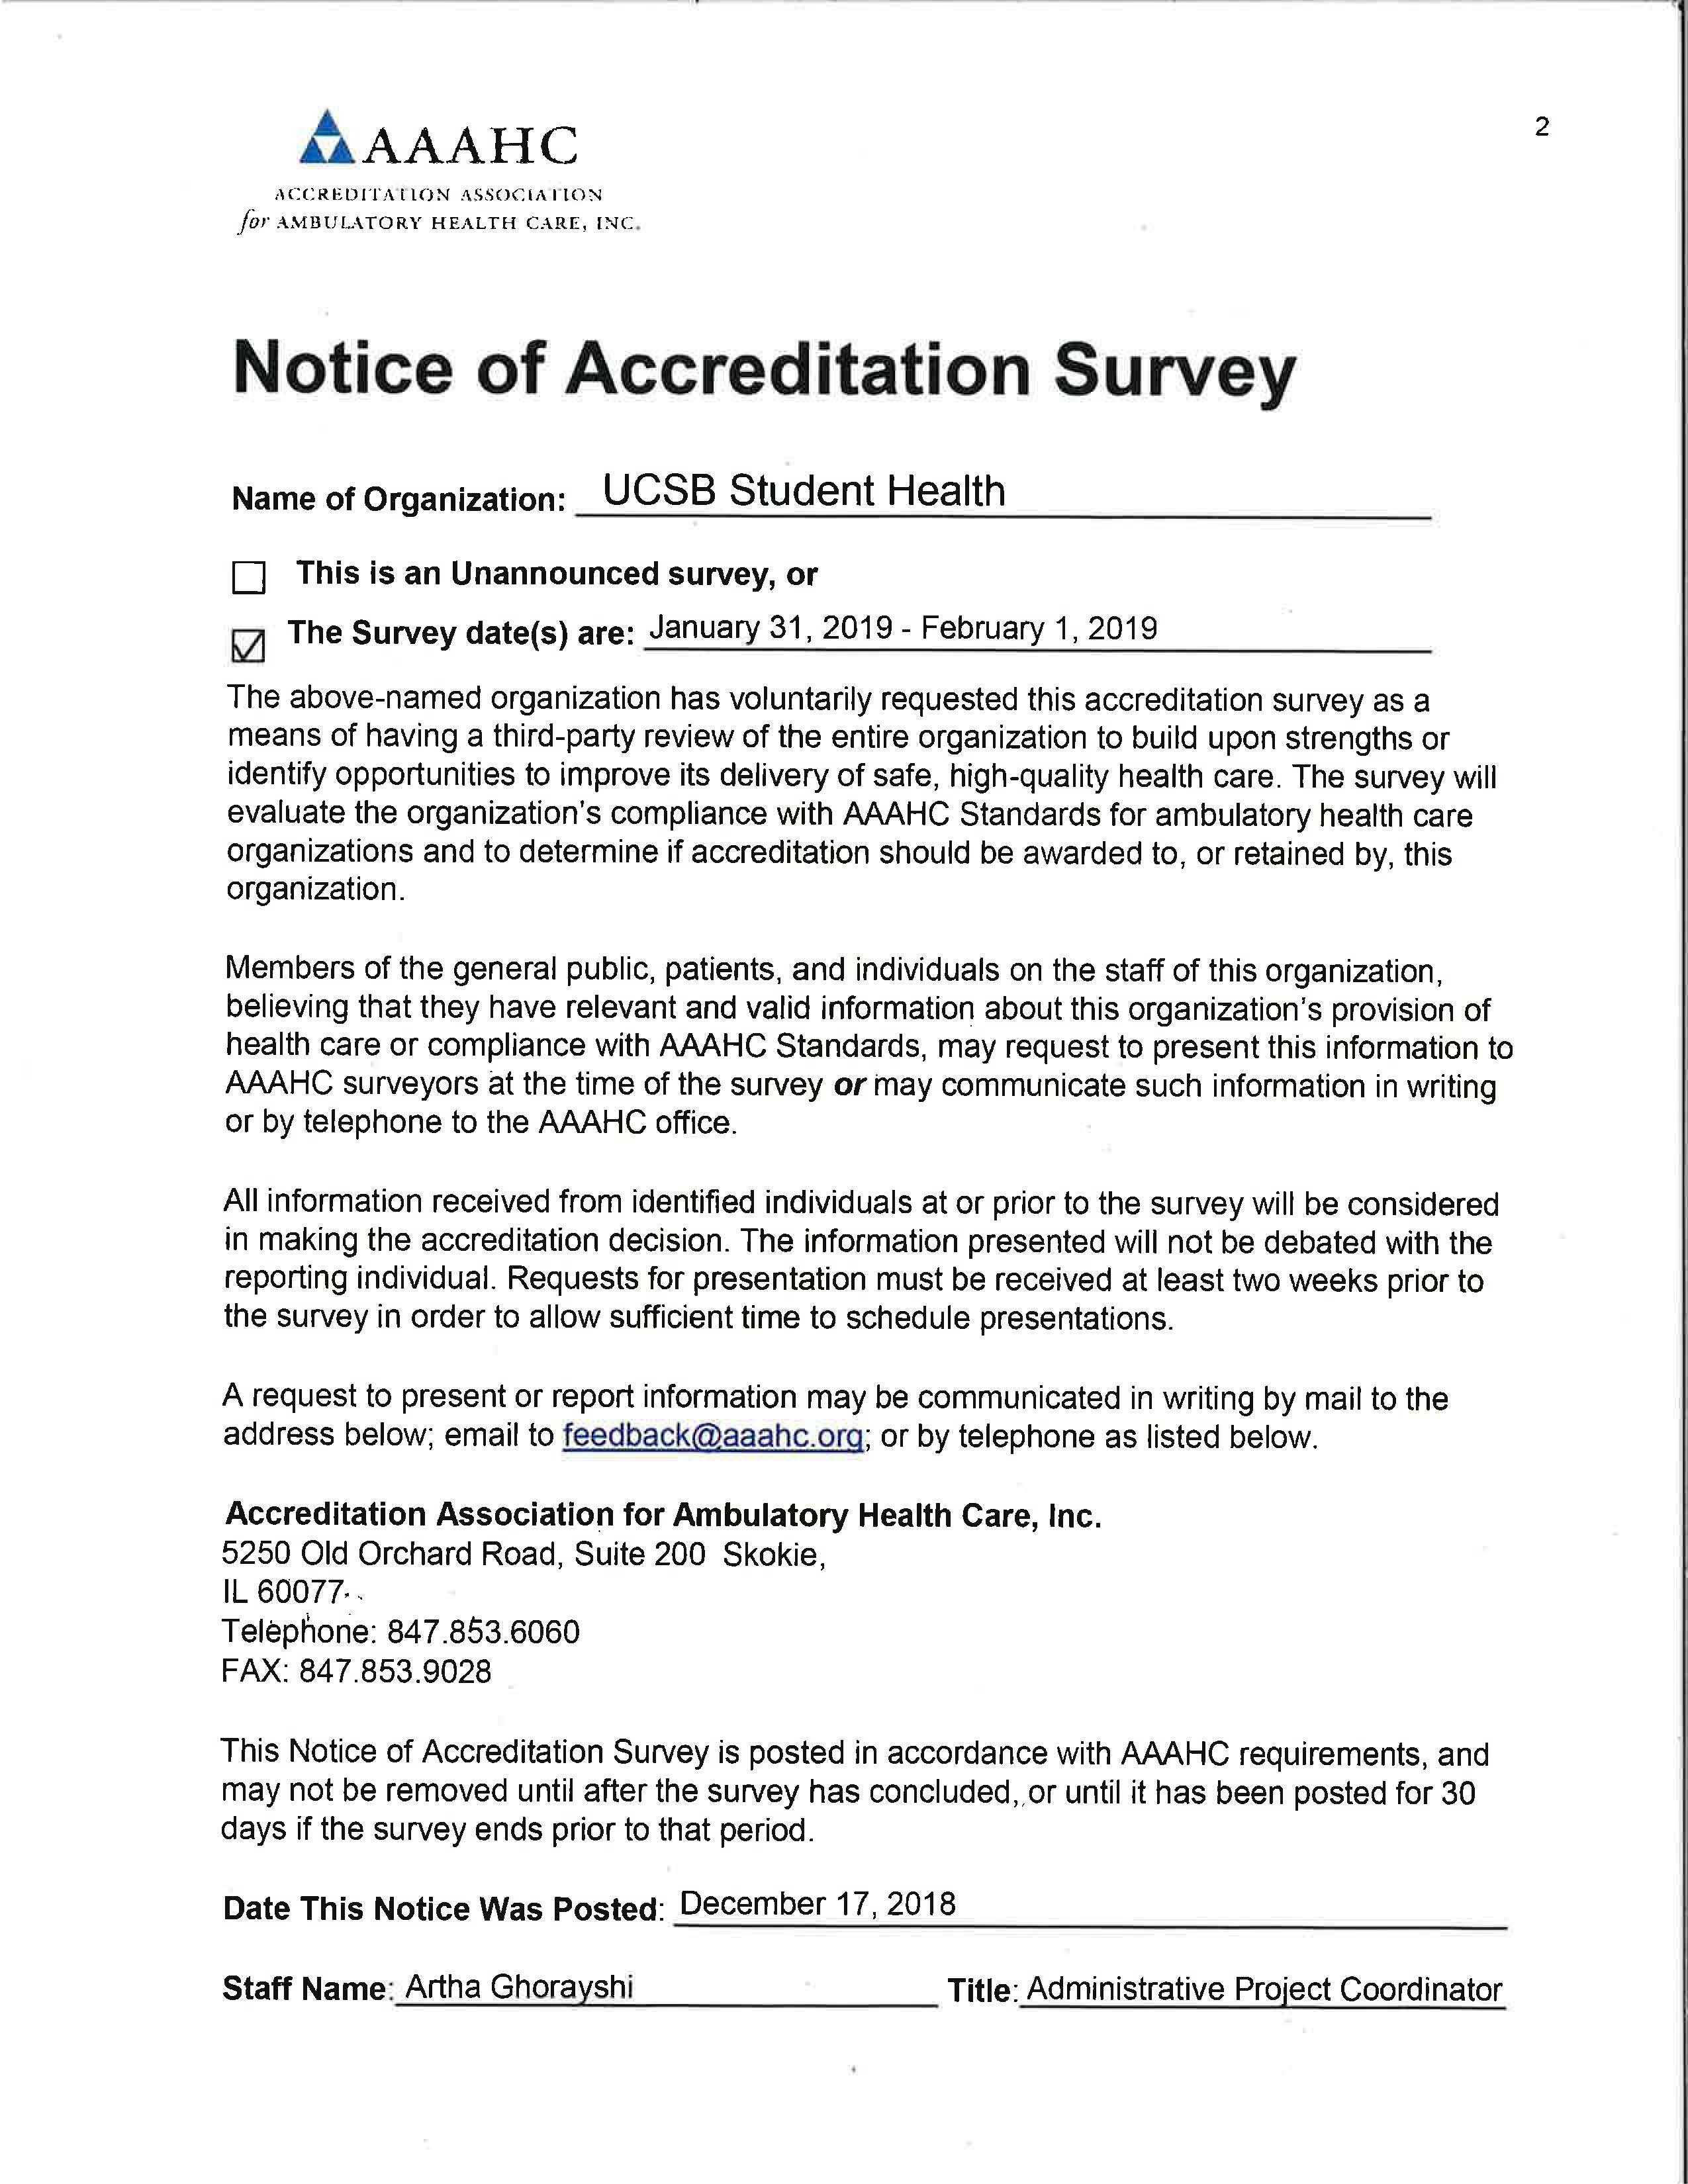 AAAHC Notice of Accreditation Survey